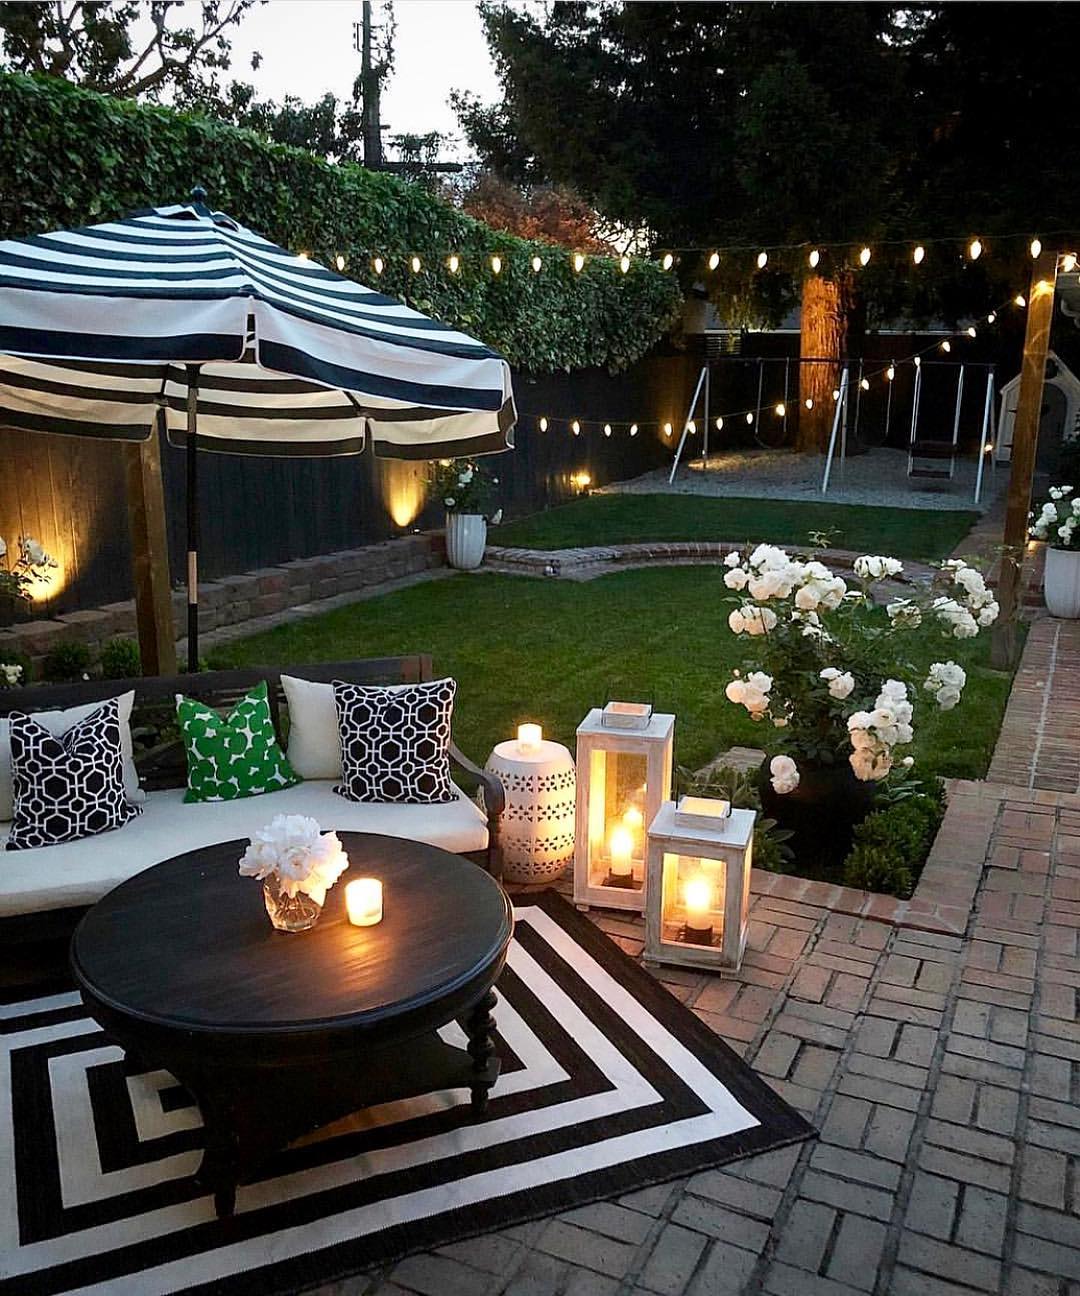 Outdoor Living Room in the Backyard. Photo by Instagram user @therealmlandreth59